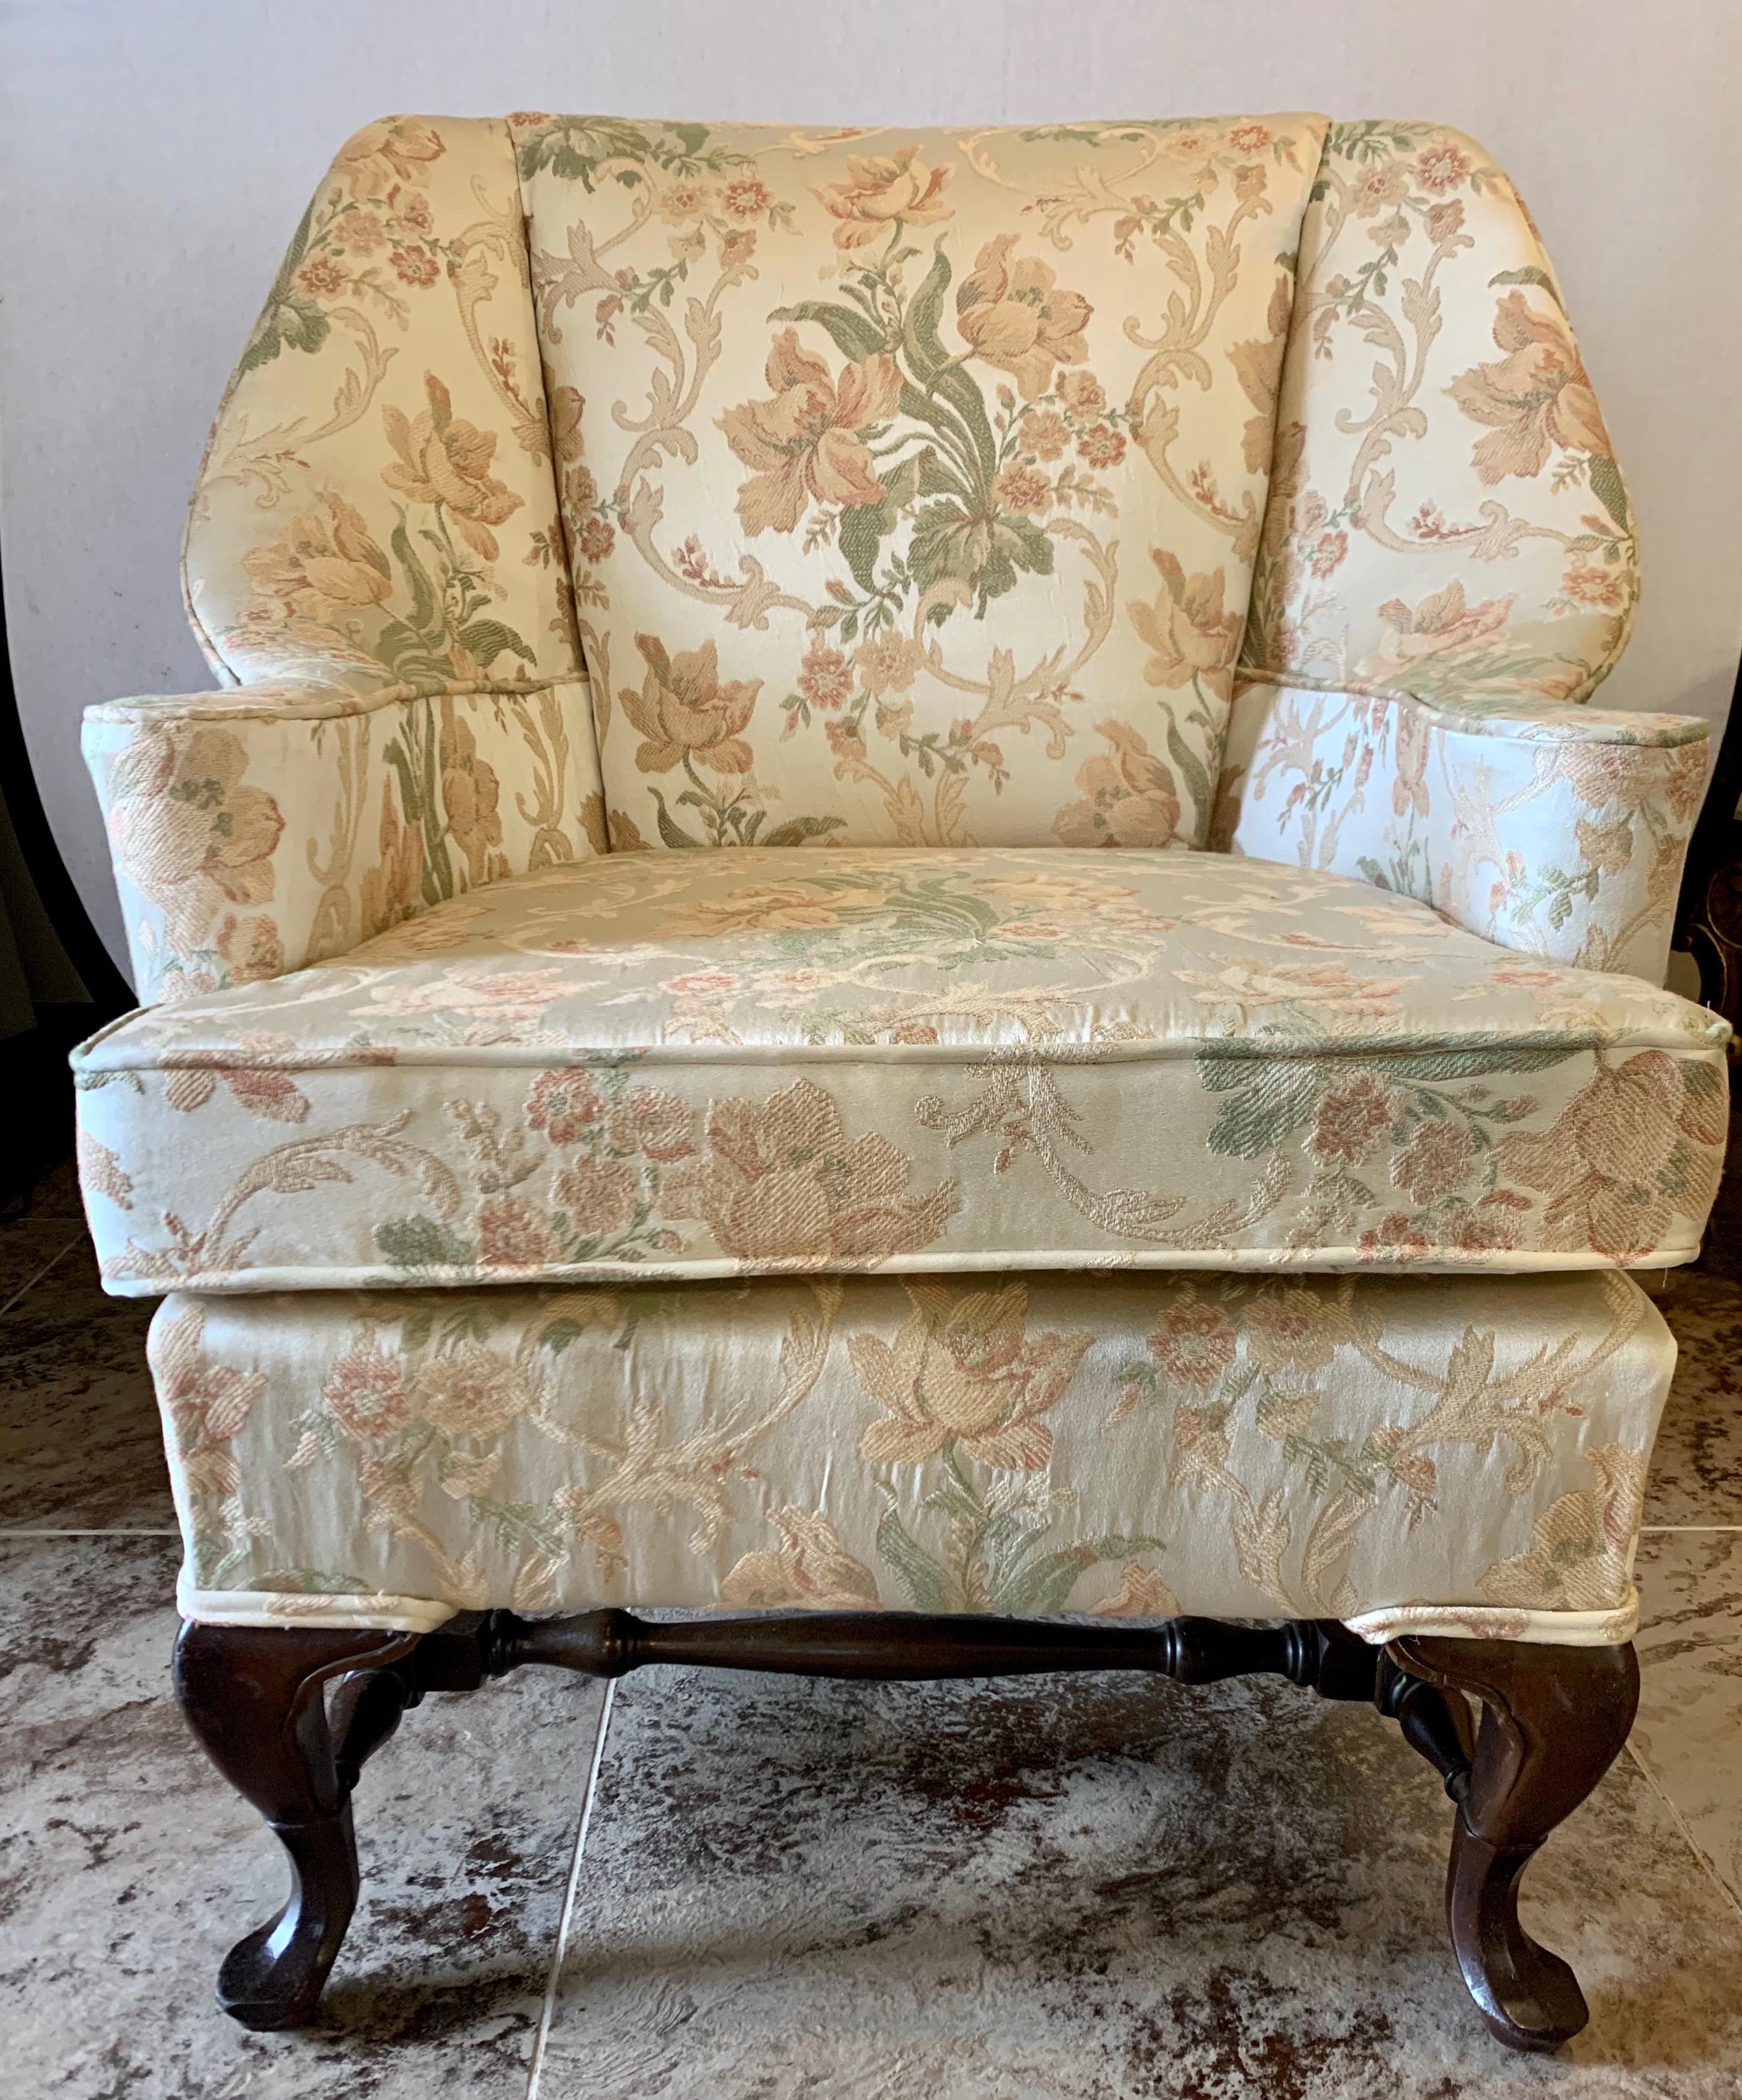 Philadelphia Hepplewhite grand wingback mahogany chair that has been reupholstered in two gorgeous
Scalamandre fabrics, at front and arms and the other at back - see all pics. Nothing short of sensational.
Seat cushions also have brand new fill in